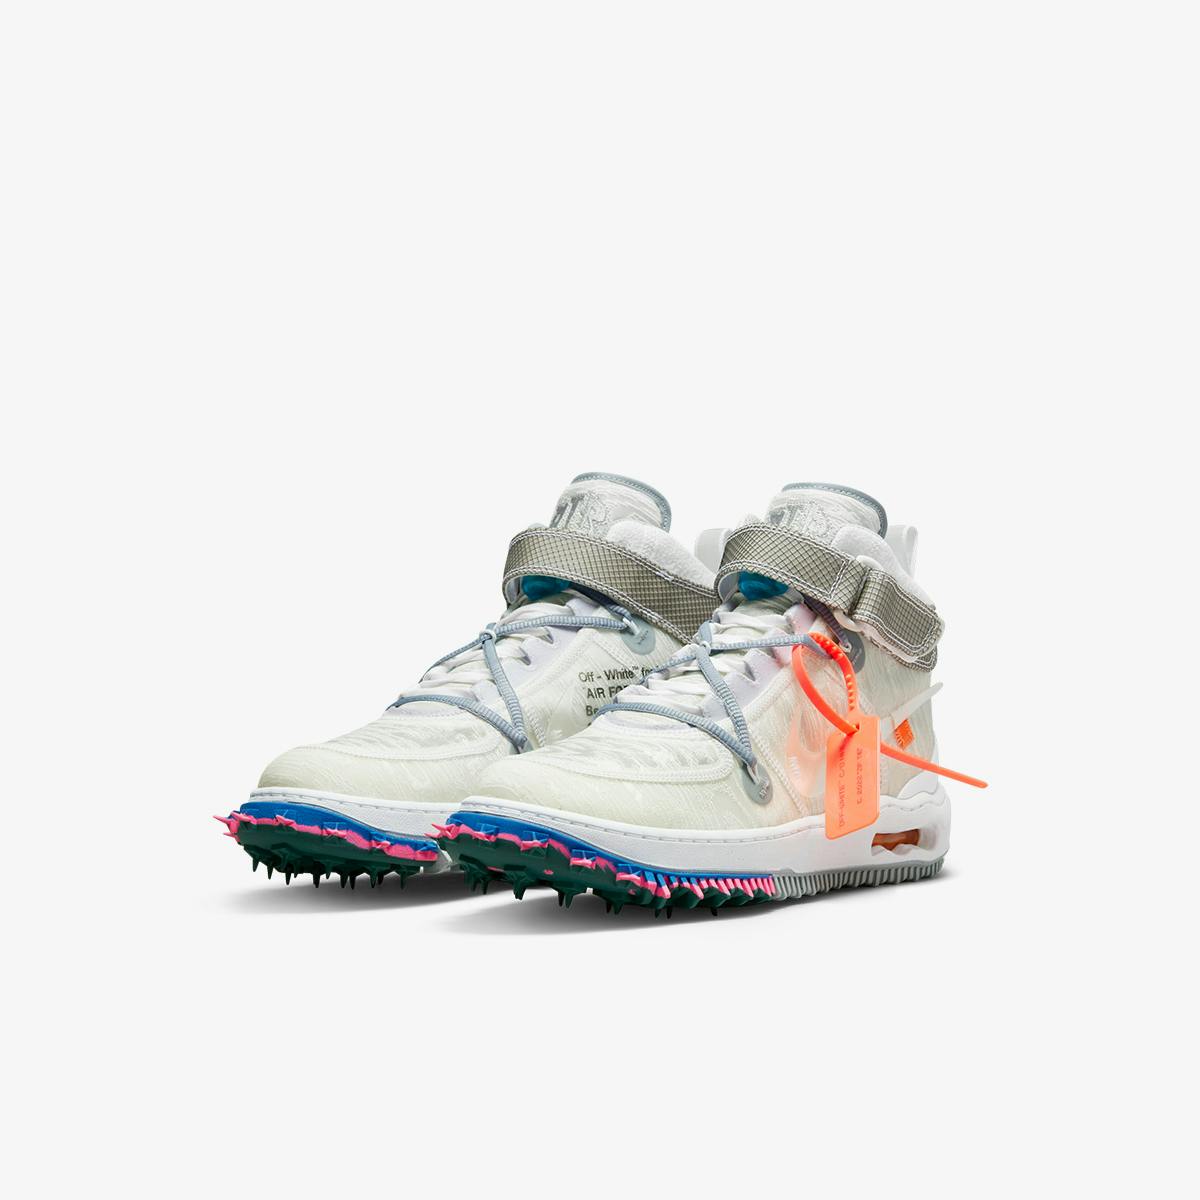 Nike x Off-White™ Collection – Limited Edt